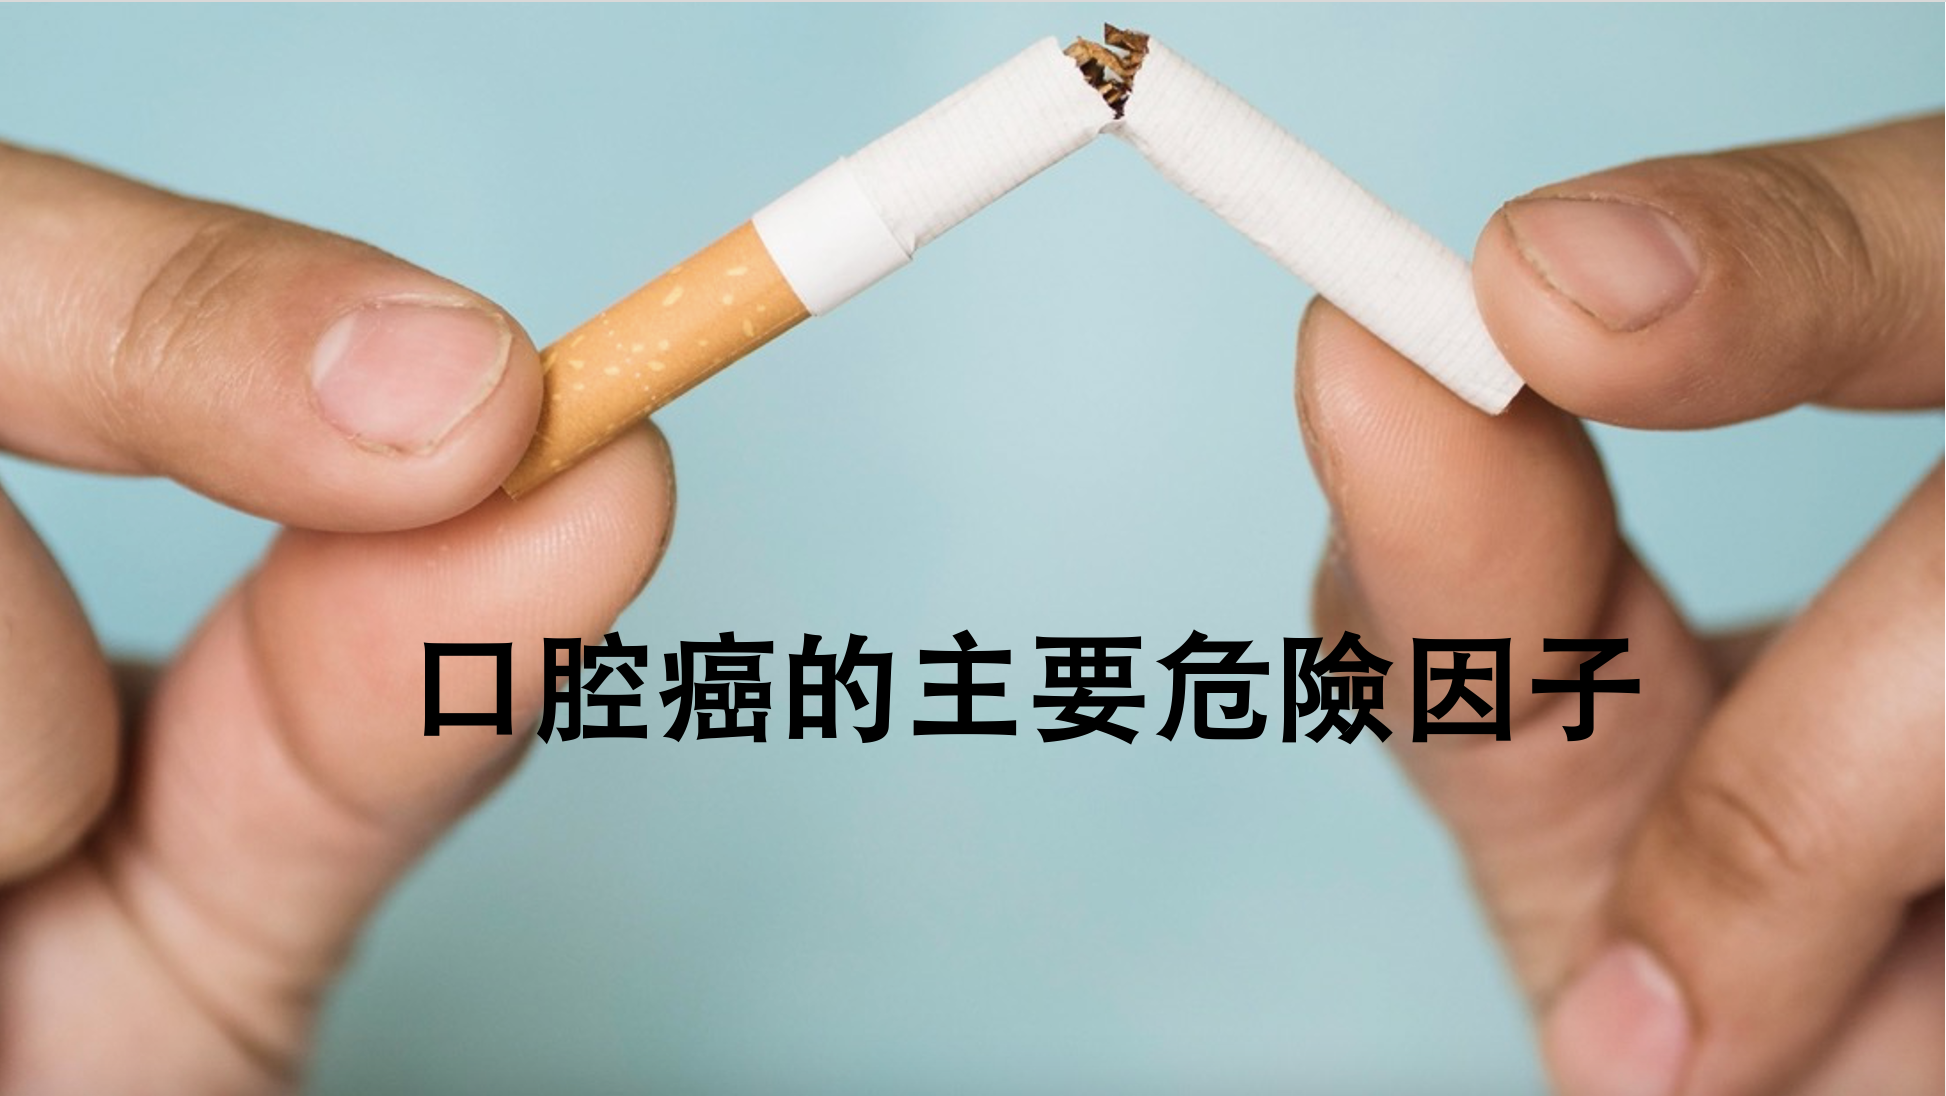 Smoking Increases Risk of Periodontal Disease; Quitting Protects Oral Health